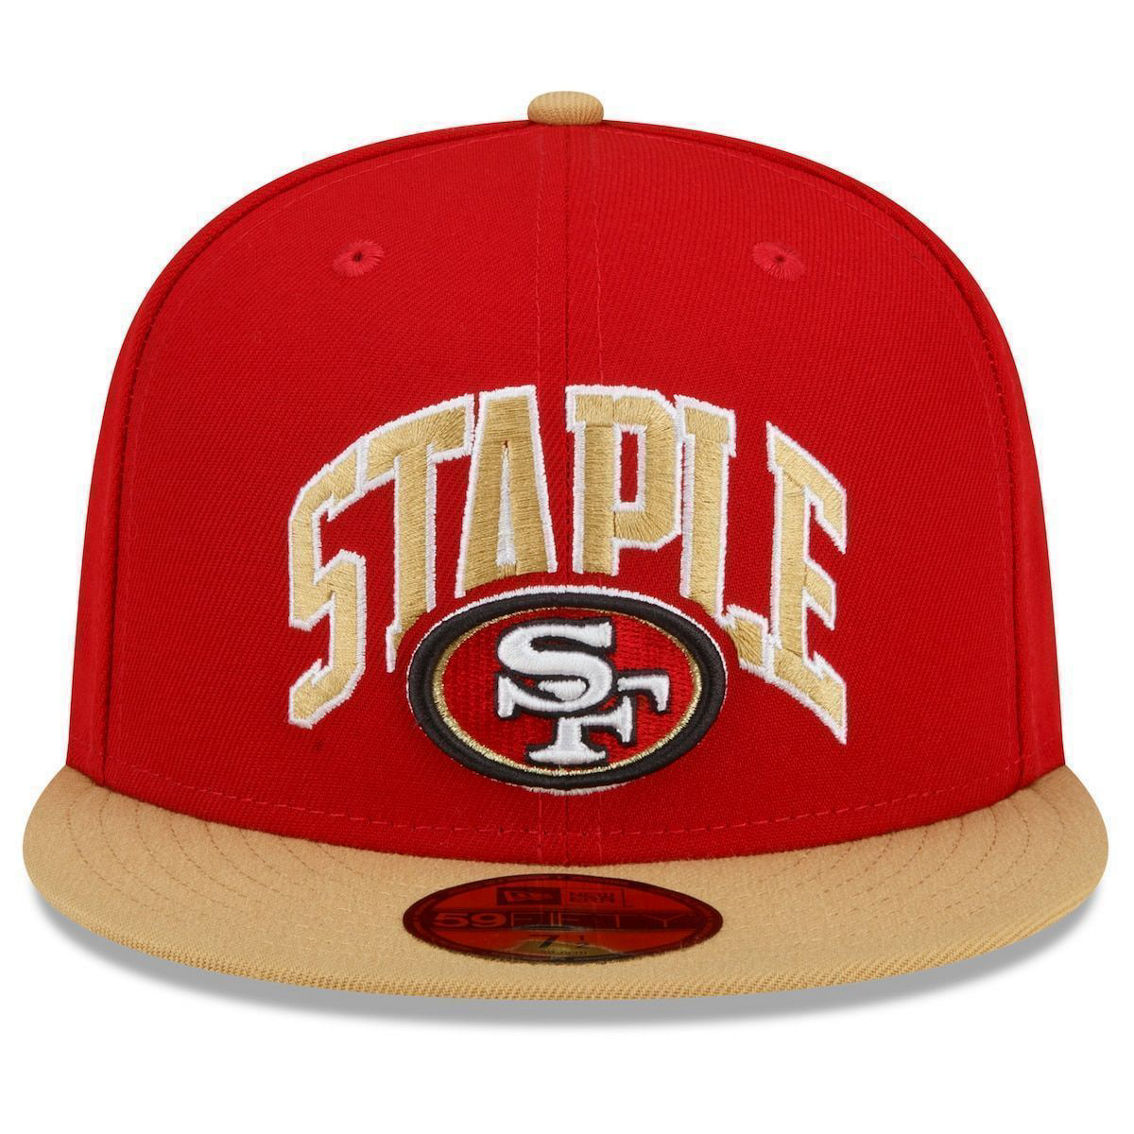 New Era x Staple Men's Scarlet/Gold San Francisco 49ers NFL x Collection 59FIFTY Fitted Hat - Image 3 of 4